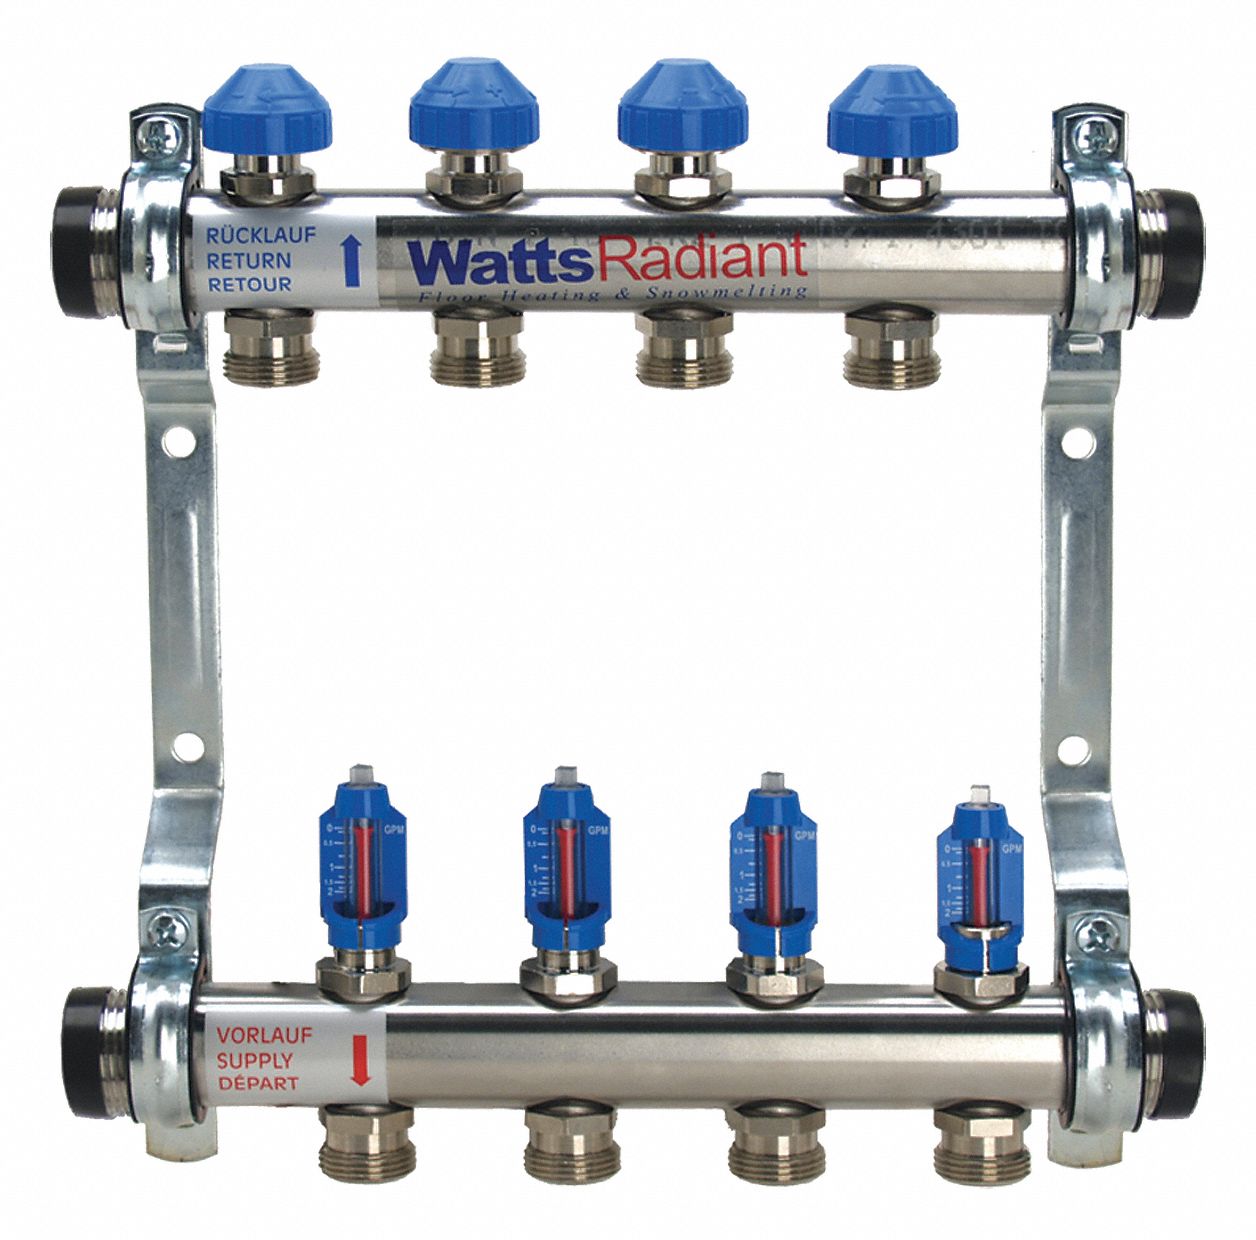 Flowmeter Manifold: 304 Stainless Steel, 4 Outlets, 1 in Male MBSP inlet, 1 in Male MBSP Outlet